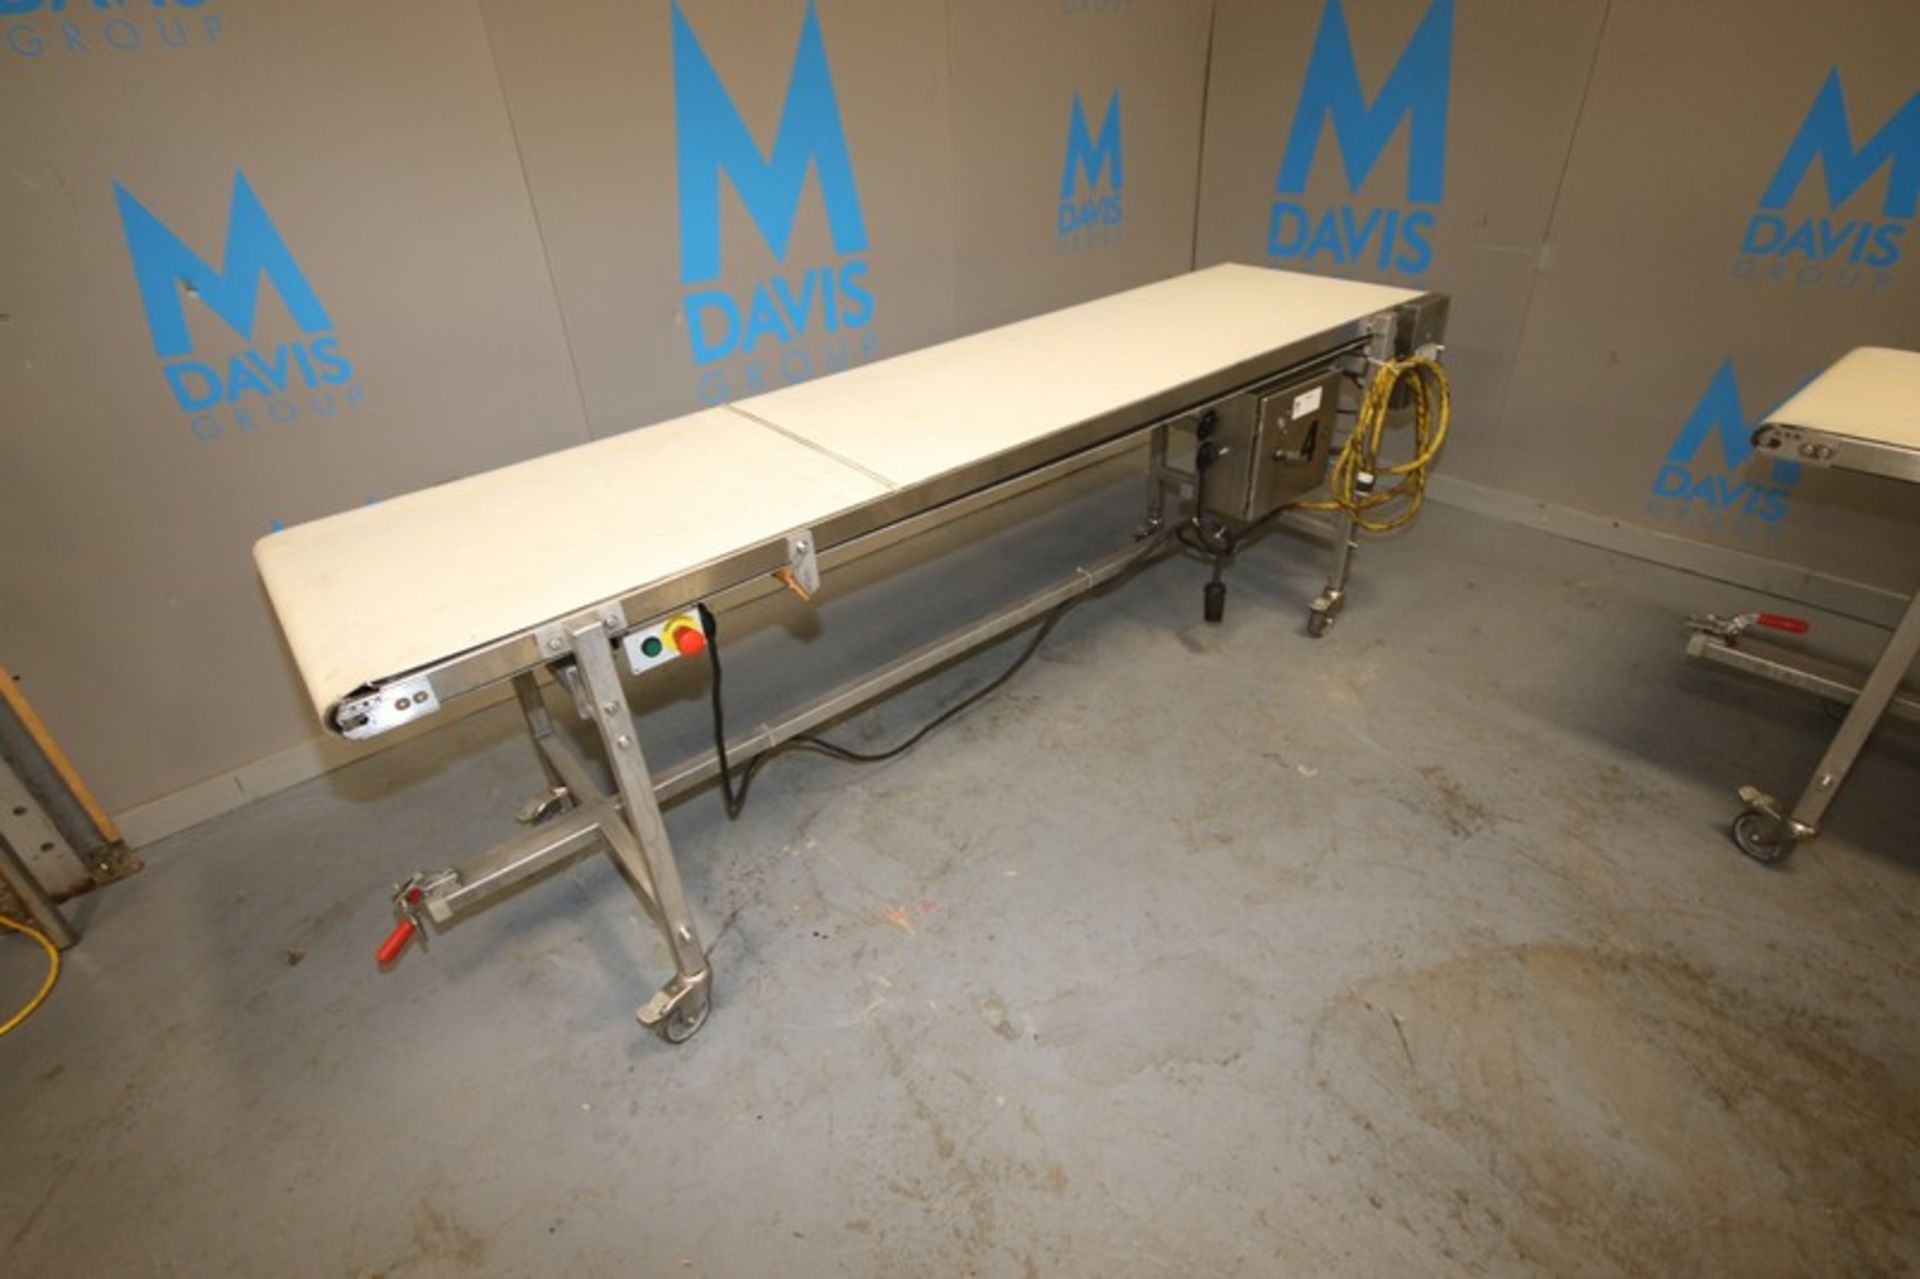 Straight Section of Conveyor,Overall Dims.: Aprox. 8' L x 23-1/4" W Belt, Mounted on S/S Portable - Image 2 of 5